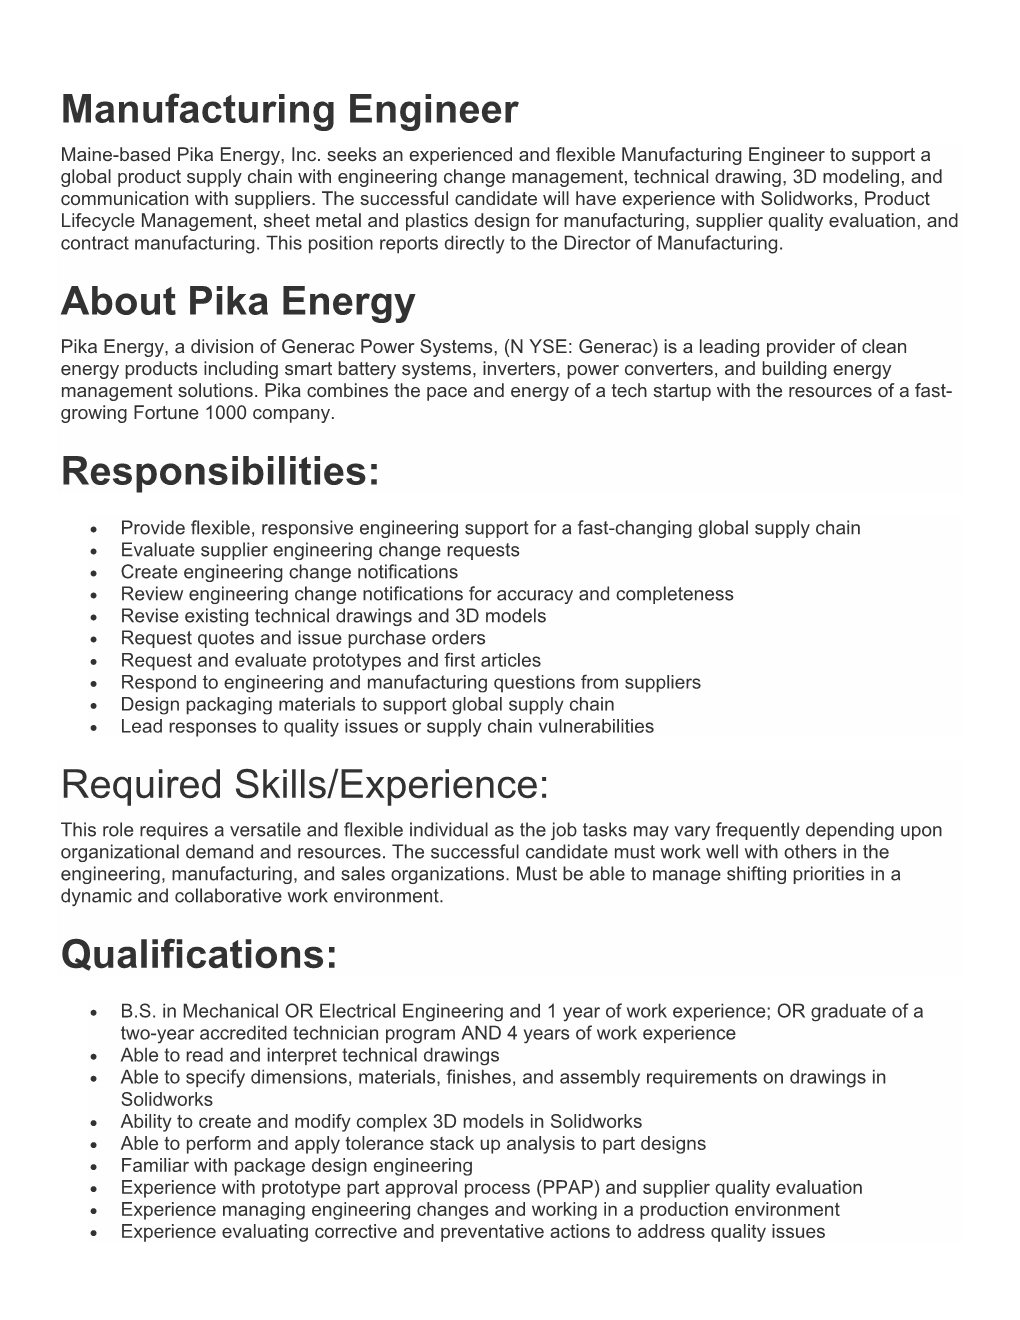 Manufacturing Engineer About Pika Energy Responsibilities